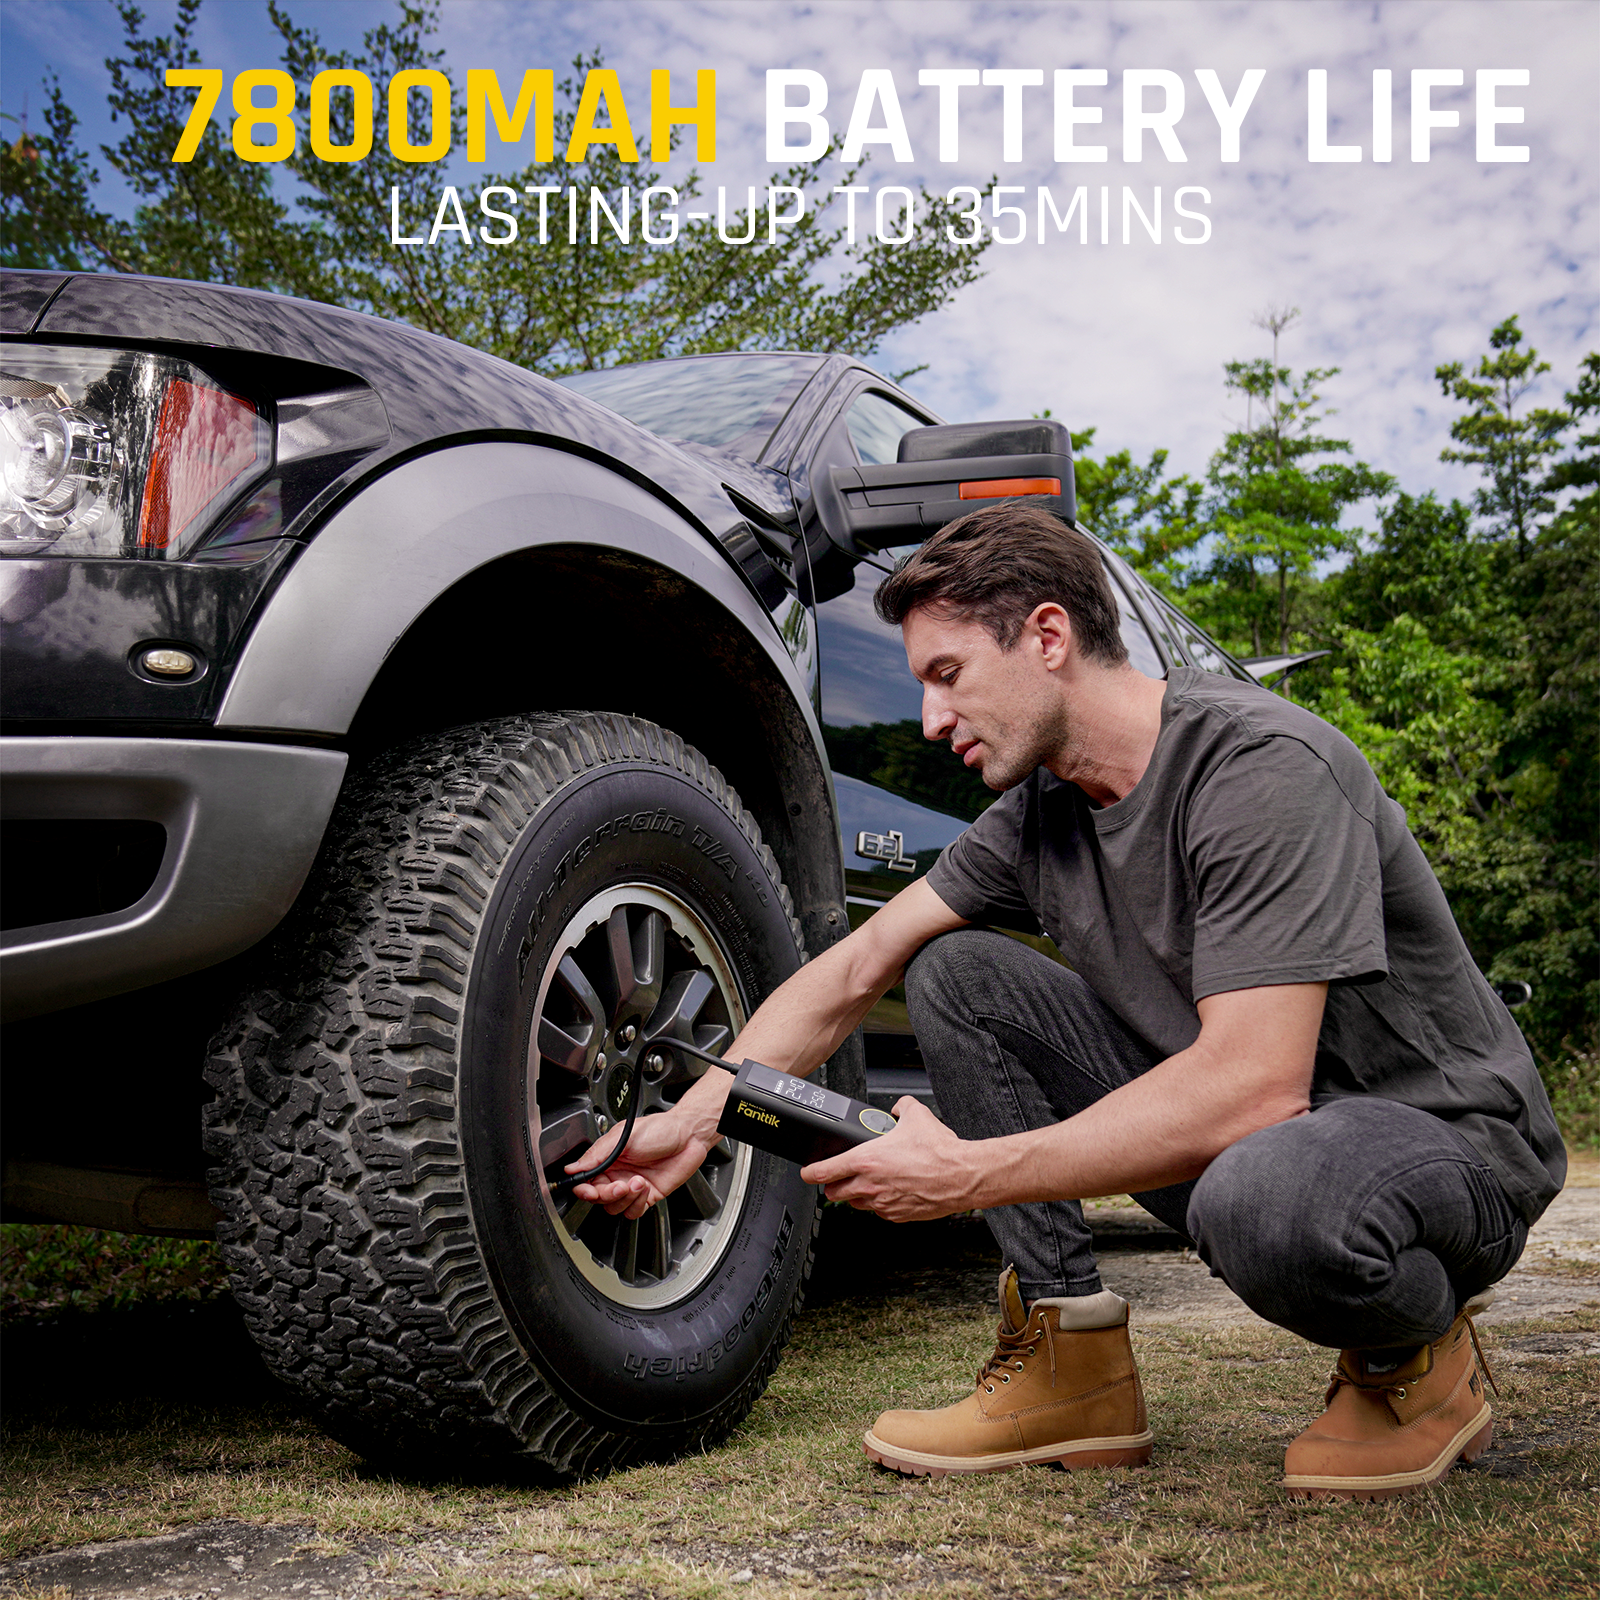 Fanttik X8 APEX Tire Inflators have 7800MAH Battery Life which could last up to 35 mins